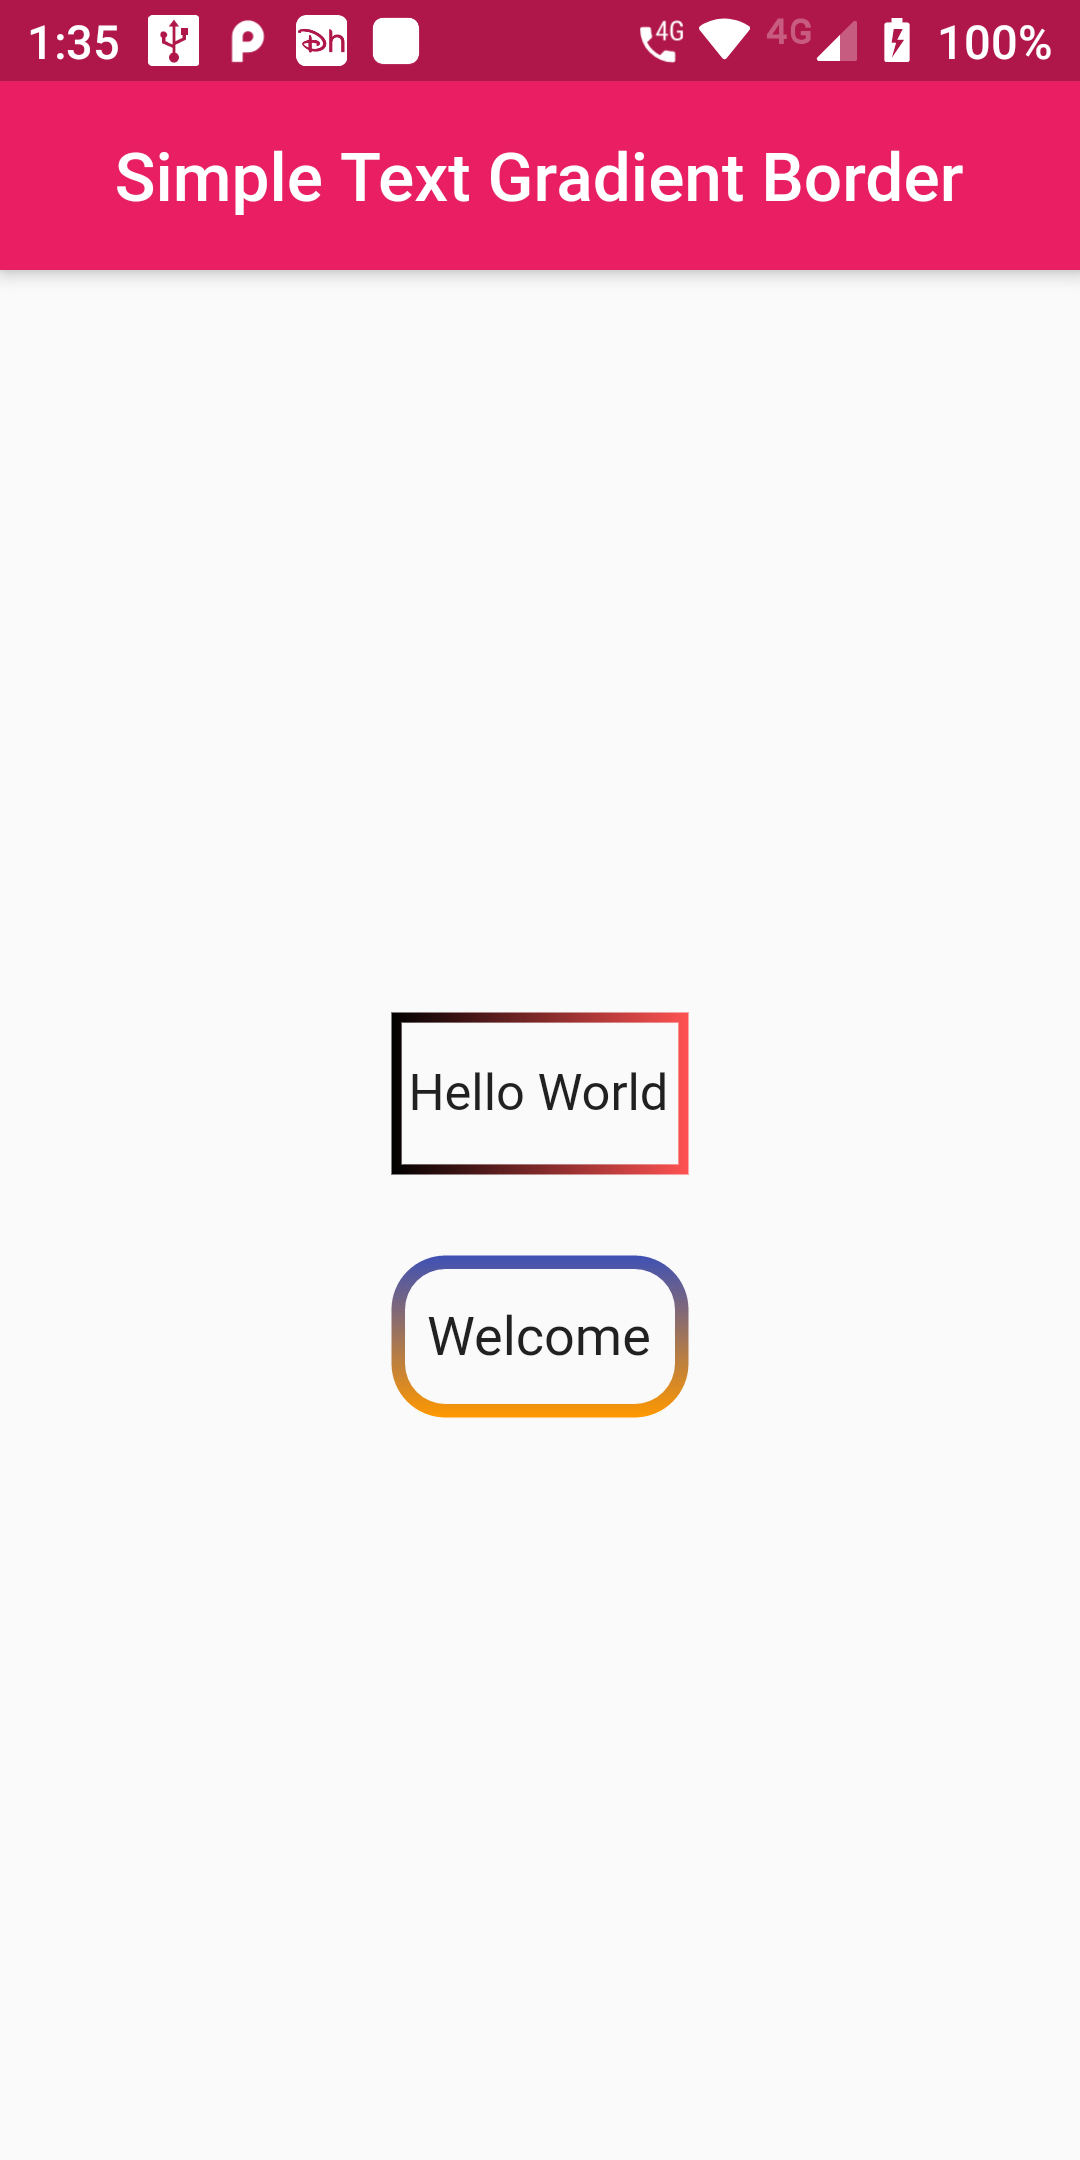 How To Add Gradient Border Using Flutter Android App